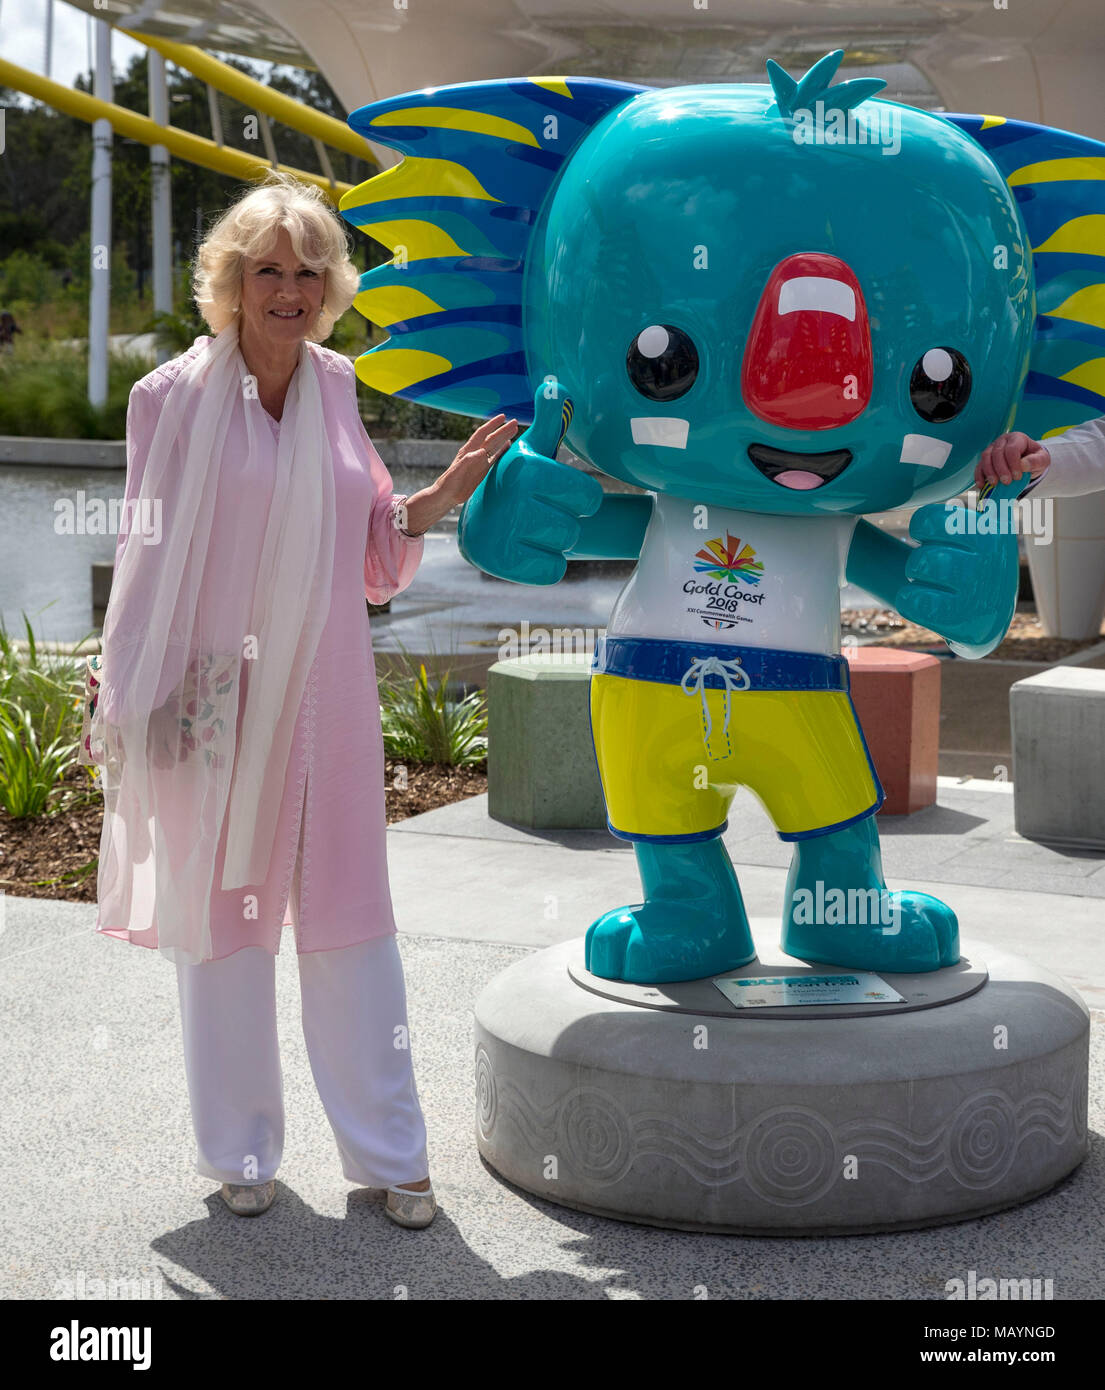 the-prince-of-wales-and-the-duchess-of-cornwall-pose-for-a-photograph-with-borobi-the-blue-koala-the-official-mascot-for-the-2018-gold-coast-commonwealth-games-during-a-visit-to-the-athletes-village-on-day-two-of-their-tour-to-australia-MAYNGD.jpg